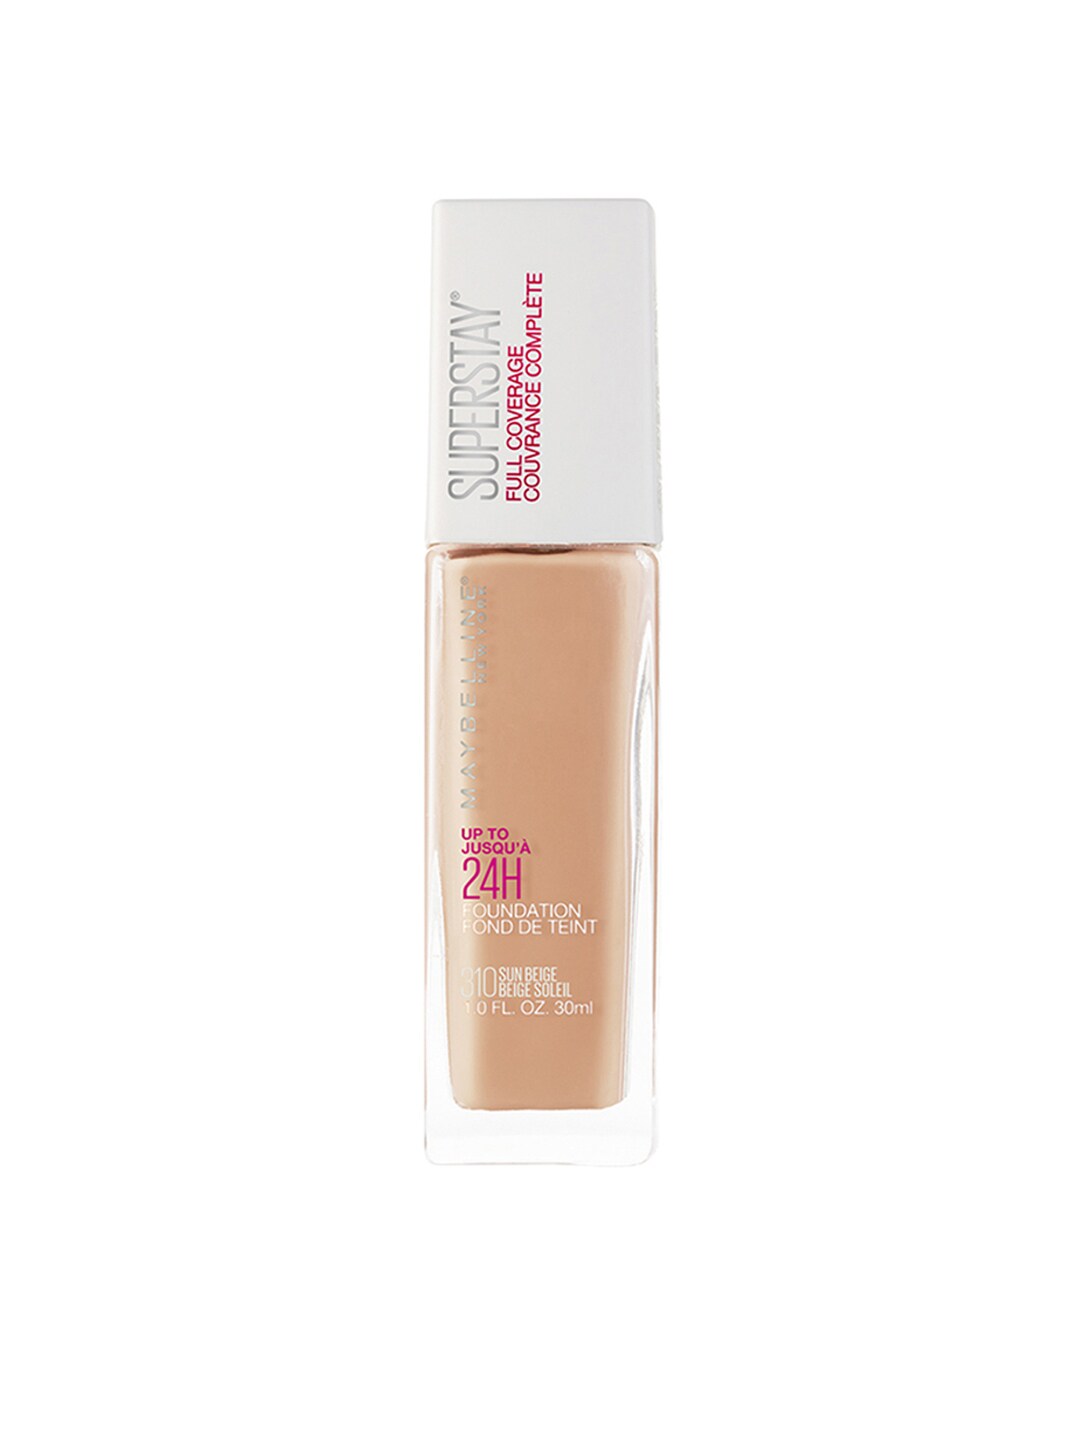 Maybelline New York Super Stay 24H Full Coverage Foundation - Sun Beige 310 30ml Price in India